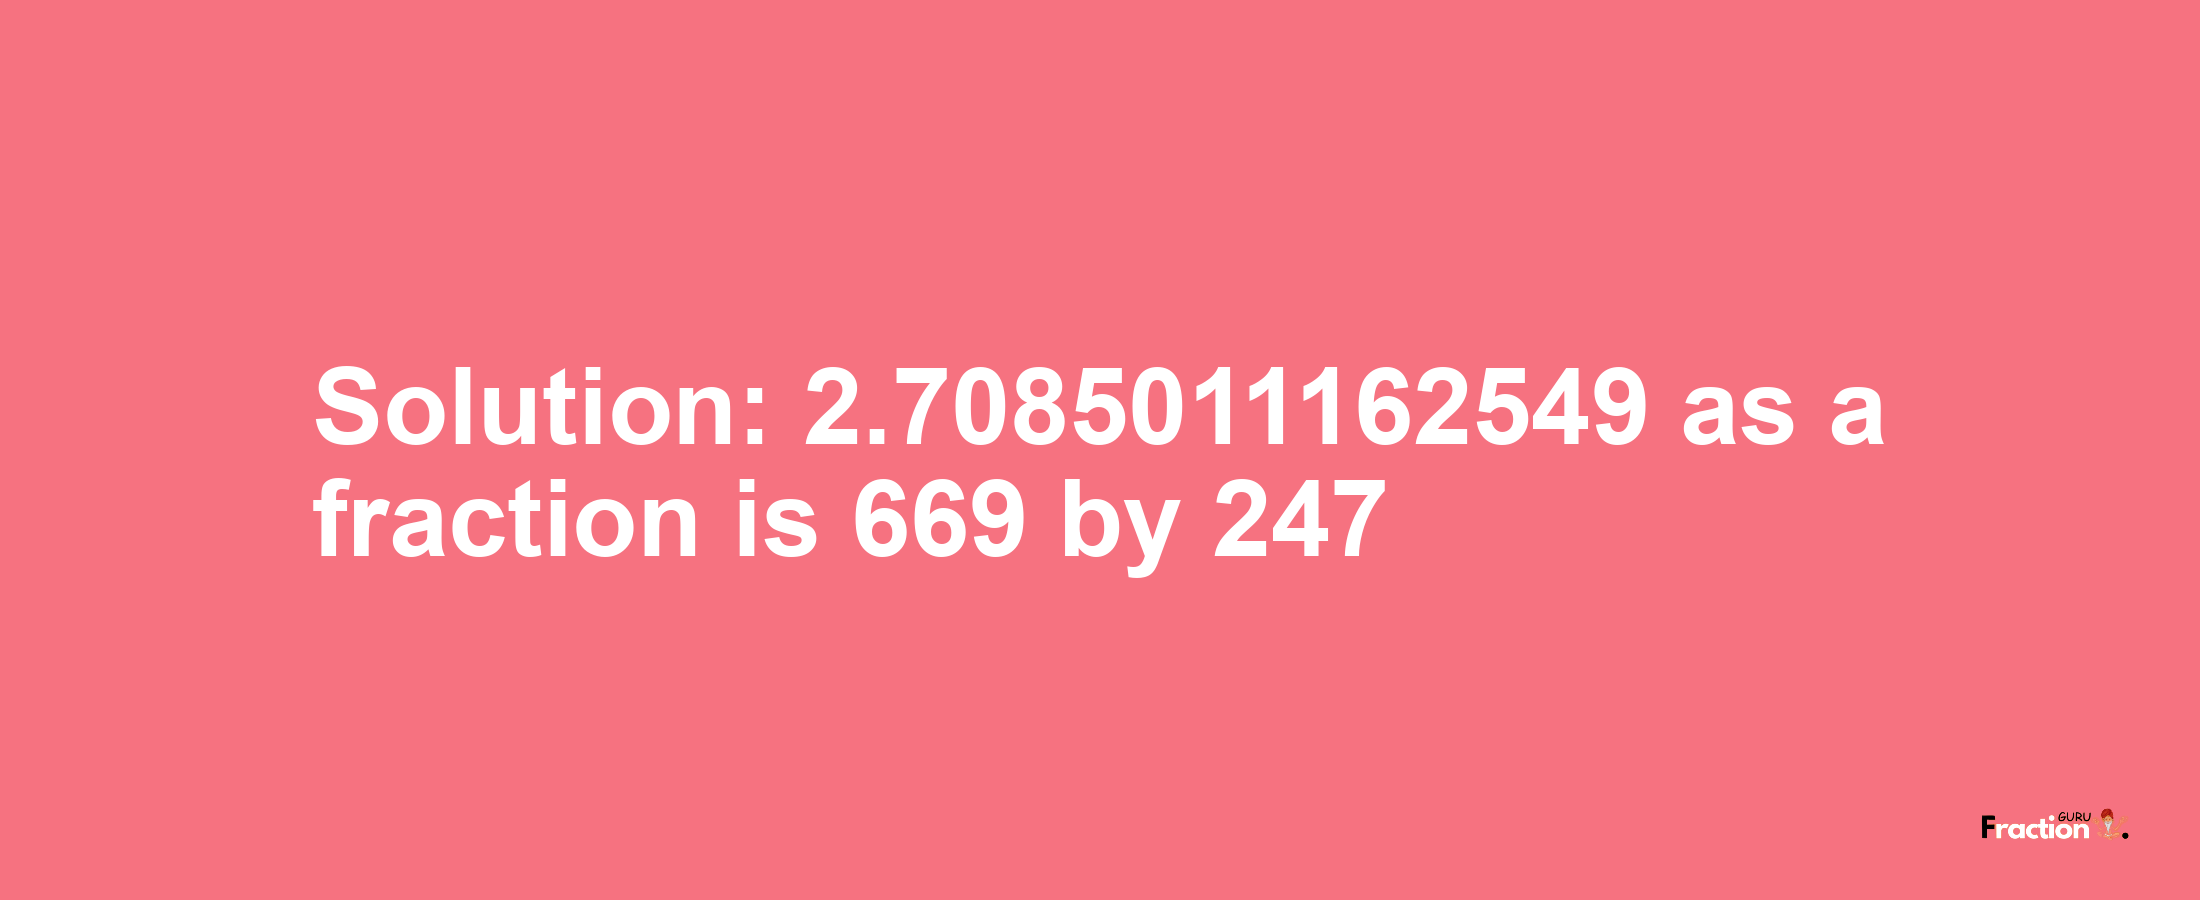 Solution:2.7085011162549 as a fraction is 669/247